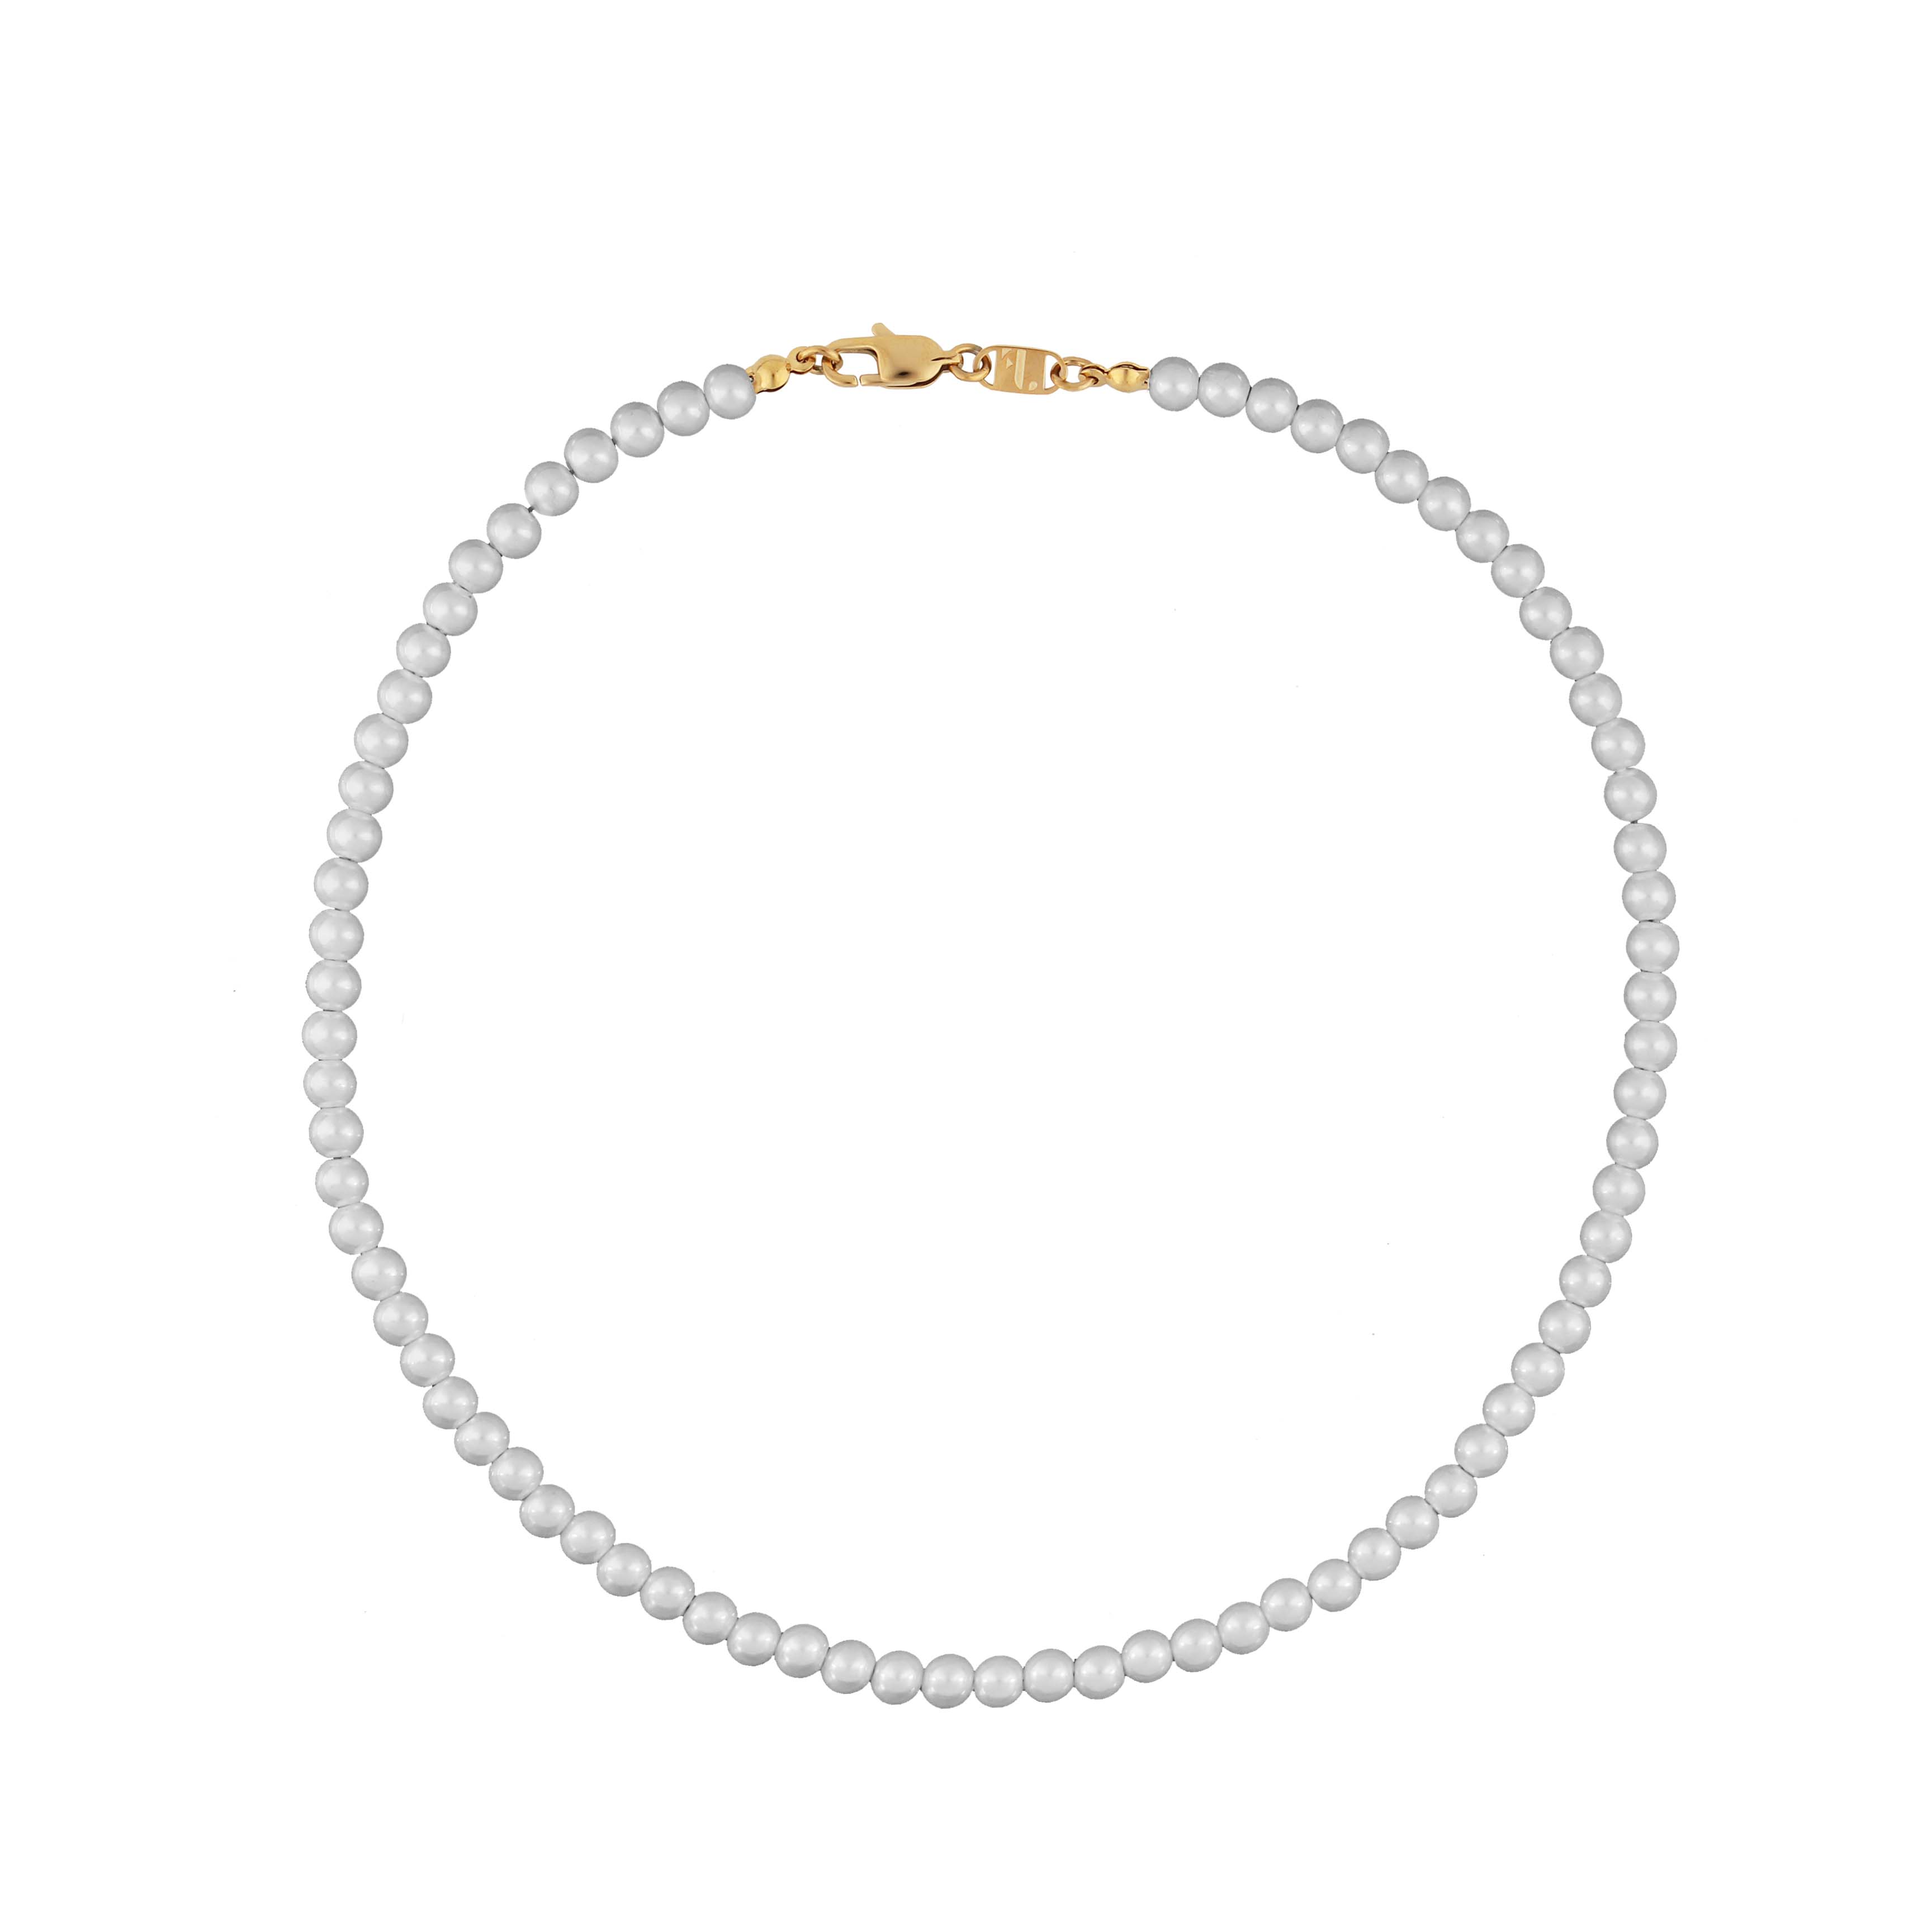 Var men's necklace by Five Jwlry, designed with white glass pearls complemented by a gold stainless steel buckle. Available in sizes 45cm and 50cm. Crafted from water-resistant 316L stainless steel. Hypoallergenic with a 2-year warranty.